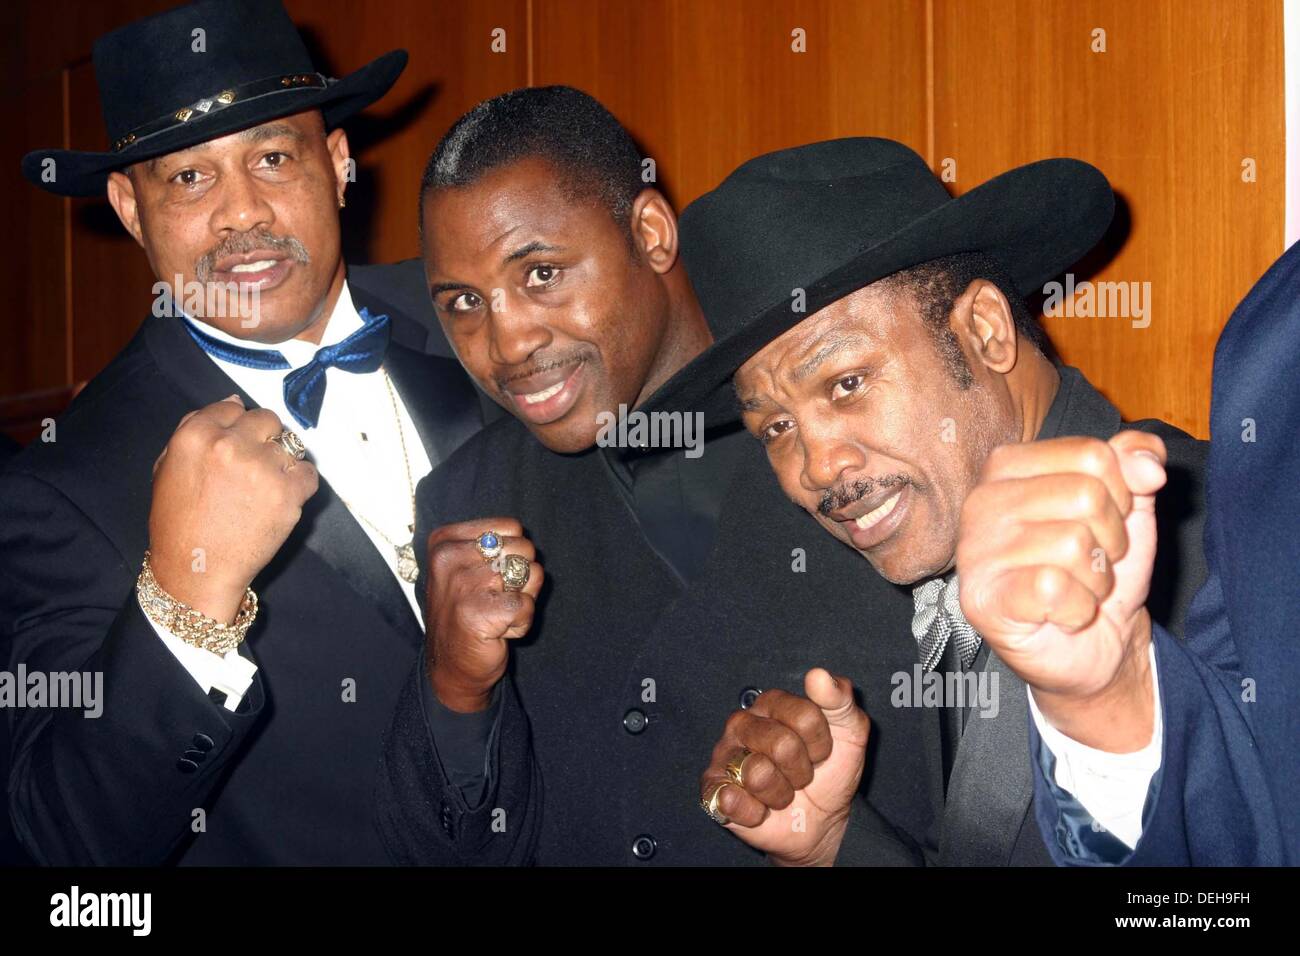 FILE PICTURES:  Kenneth Howard Norton Sr. (August 9, 1943 - September 18, 2013) was an American former heavyweight boxer and former WBC world Heavyweight Champion. He was best known for his 12-round victory over M. Ali, when he famously broke Ali's jaw, on March 31, 1973, becoming only the second man to defeat a peak Ali as a professional. PICTURED: Oct 10, 2004 - New York, New York, U.S. - From left, KEN NORTON, MARVIS FRAZIER, and JOE FRAZIER arrives at the first annual black tie gala F.I.S.T. Fights for New York. Credit:  Mitchell Levy/Globe Photos/ZUMAPRESS/Alamy Live News Stock Photo